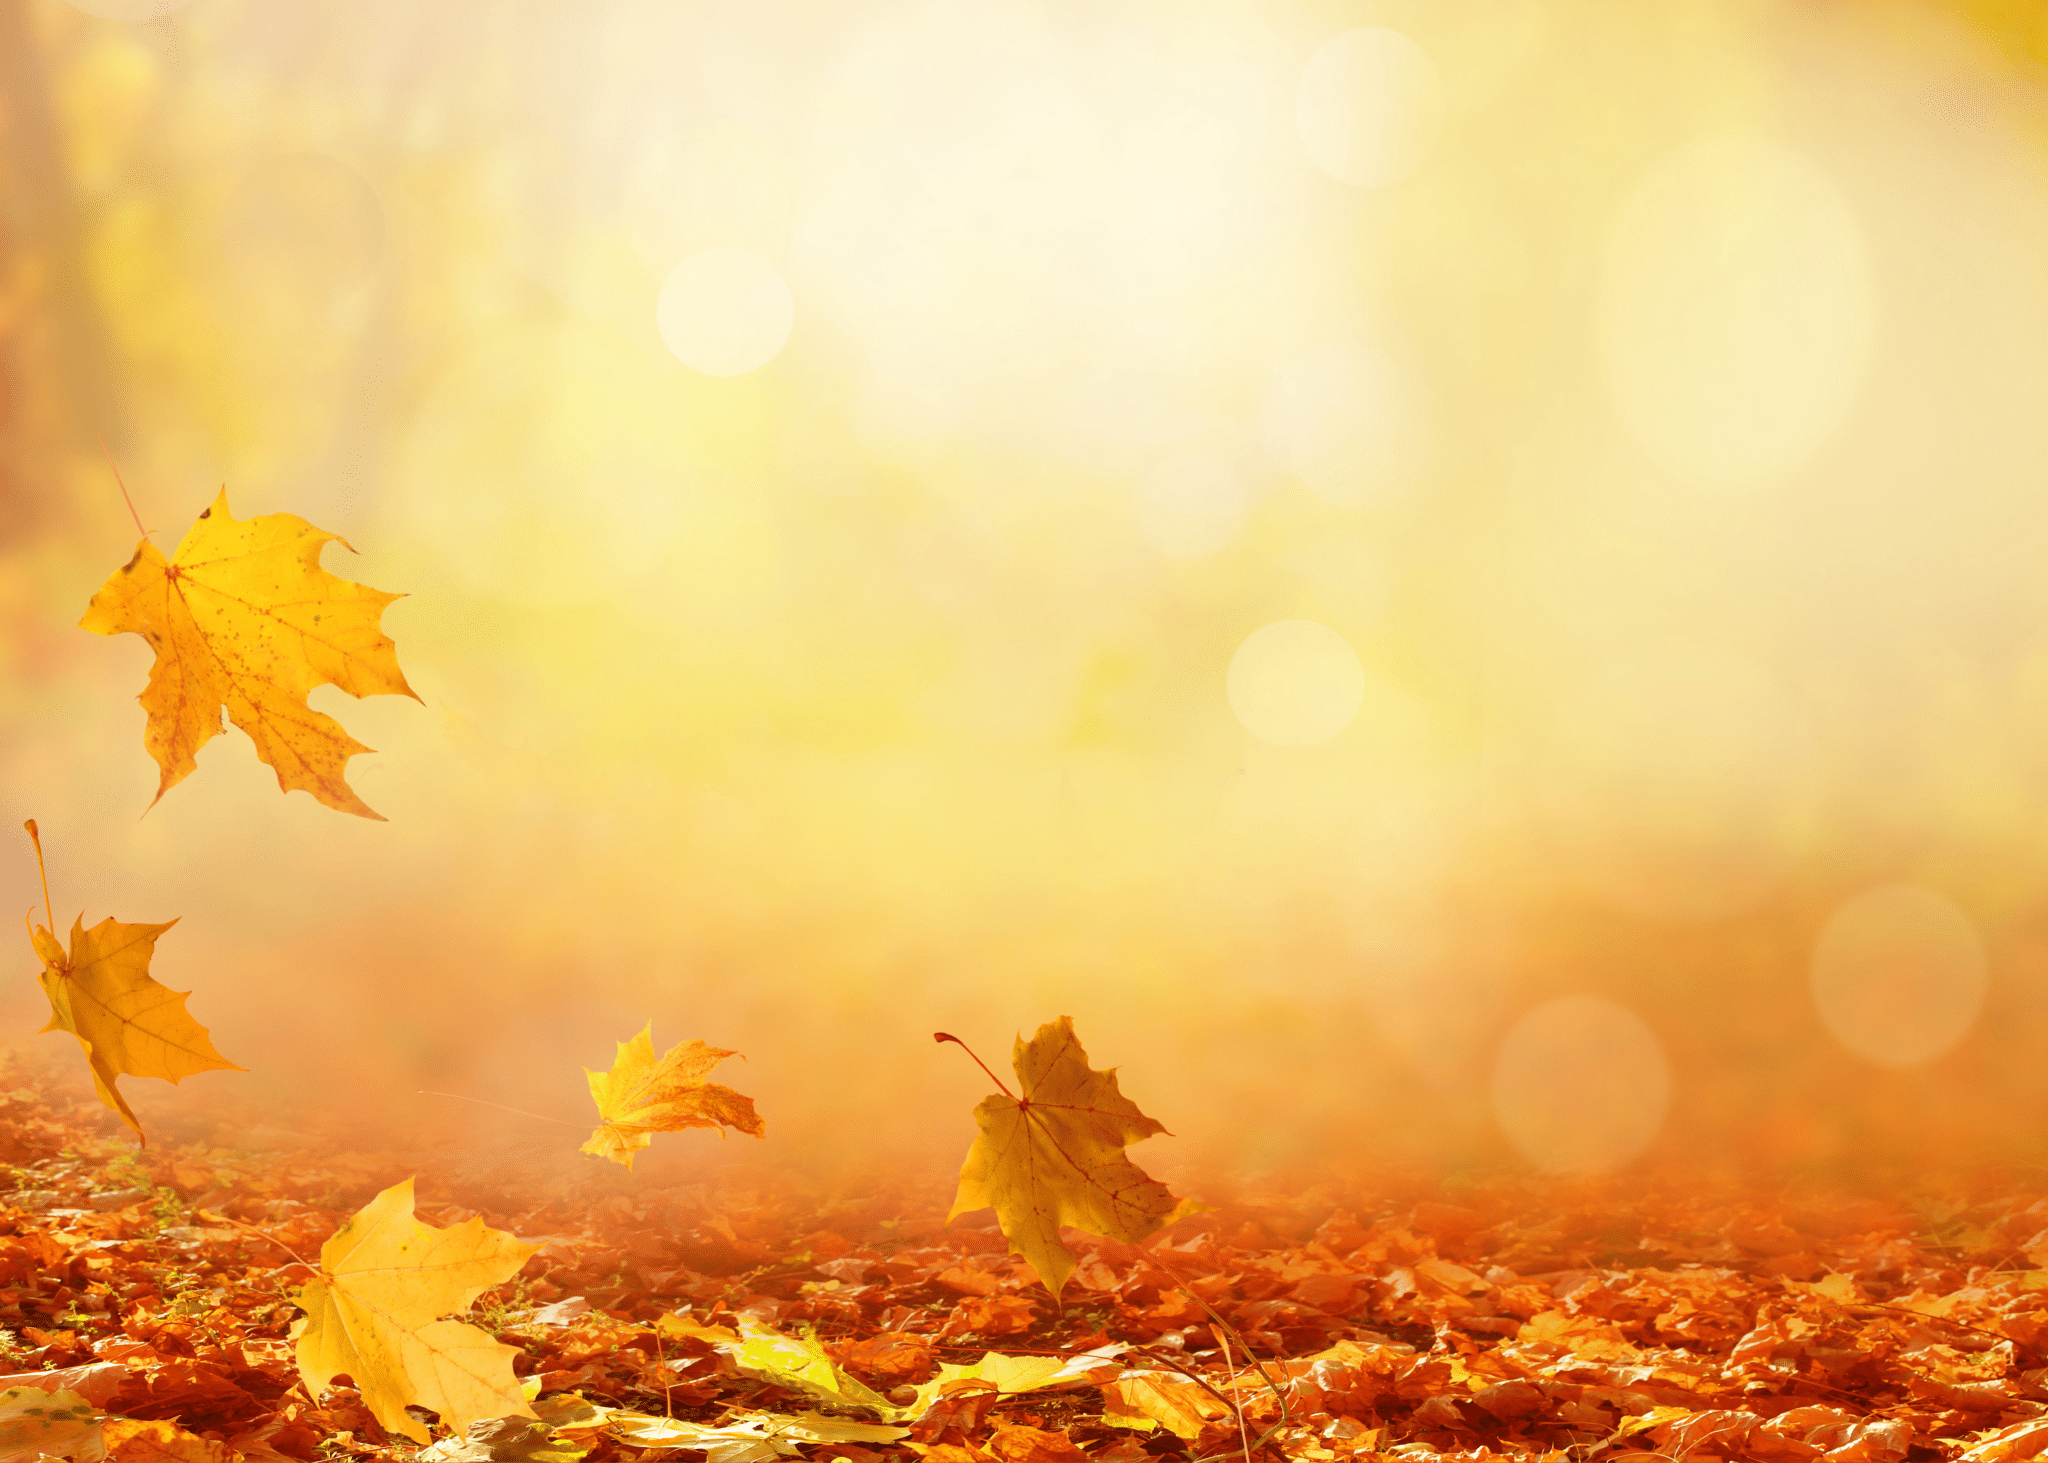 Autumn leaves on the ground with a blurred background.